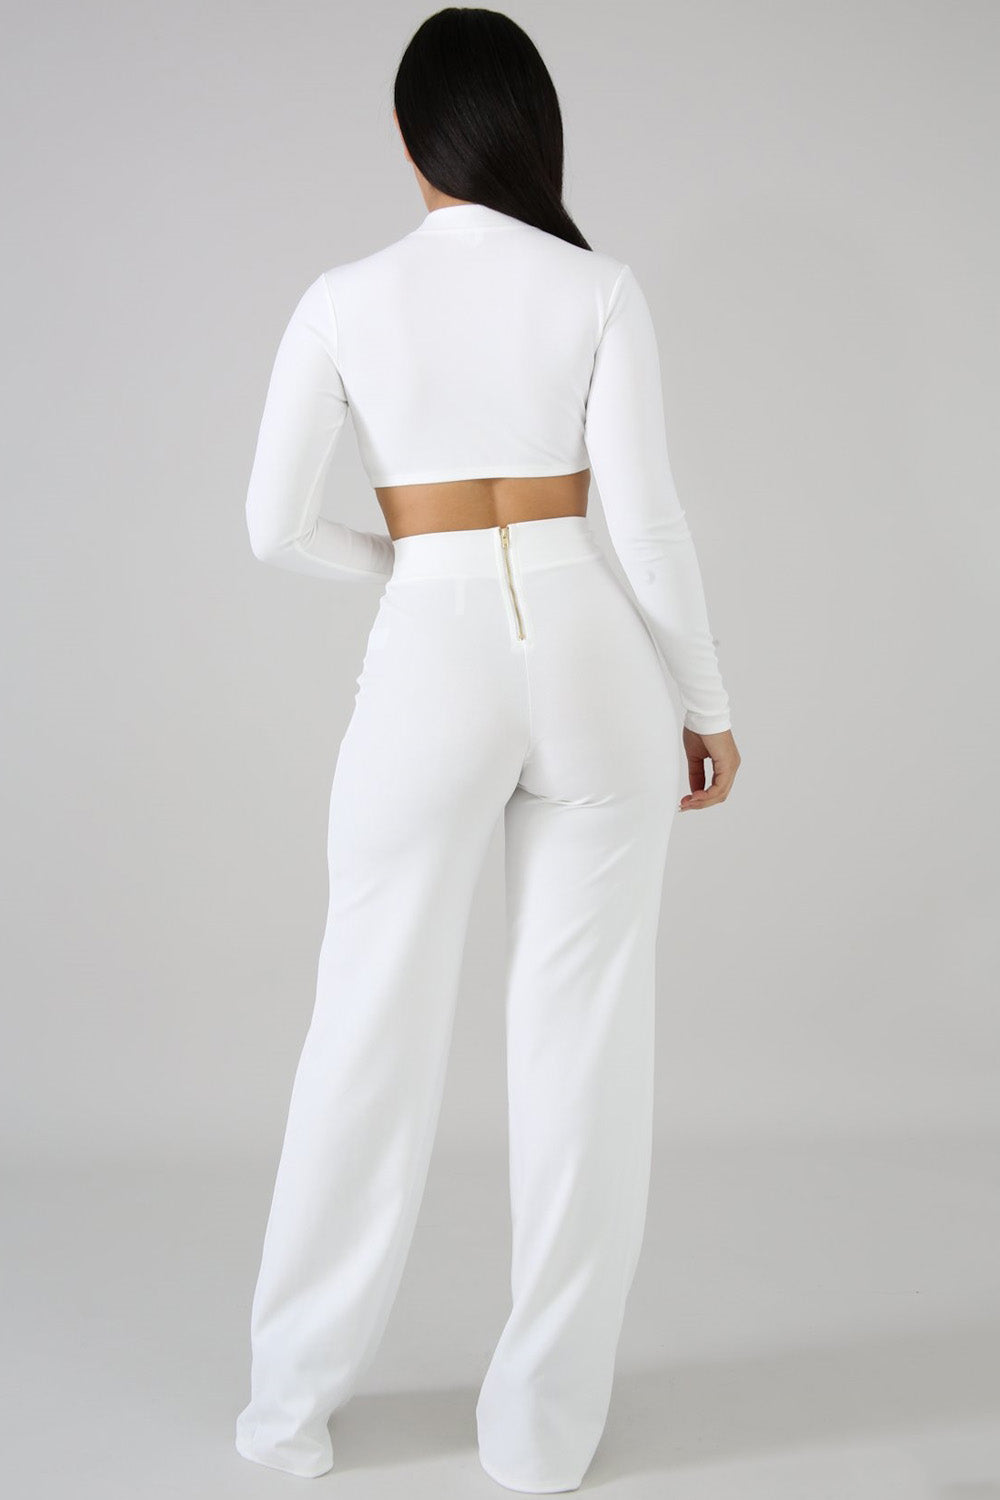 goPals 2 piece white set with long sleeve crop top and wide leg pant.